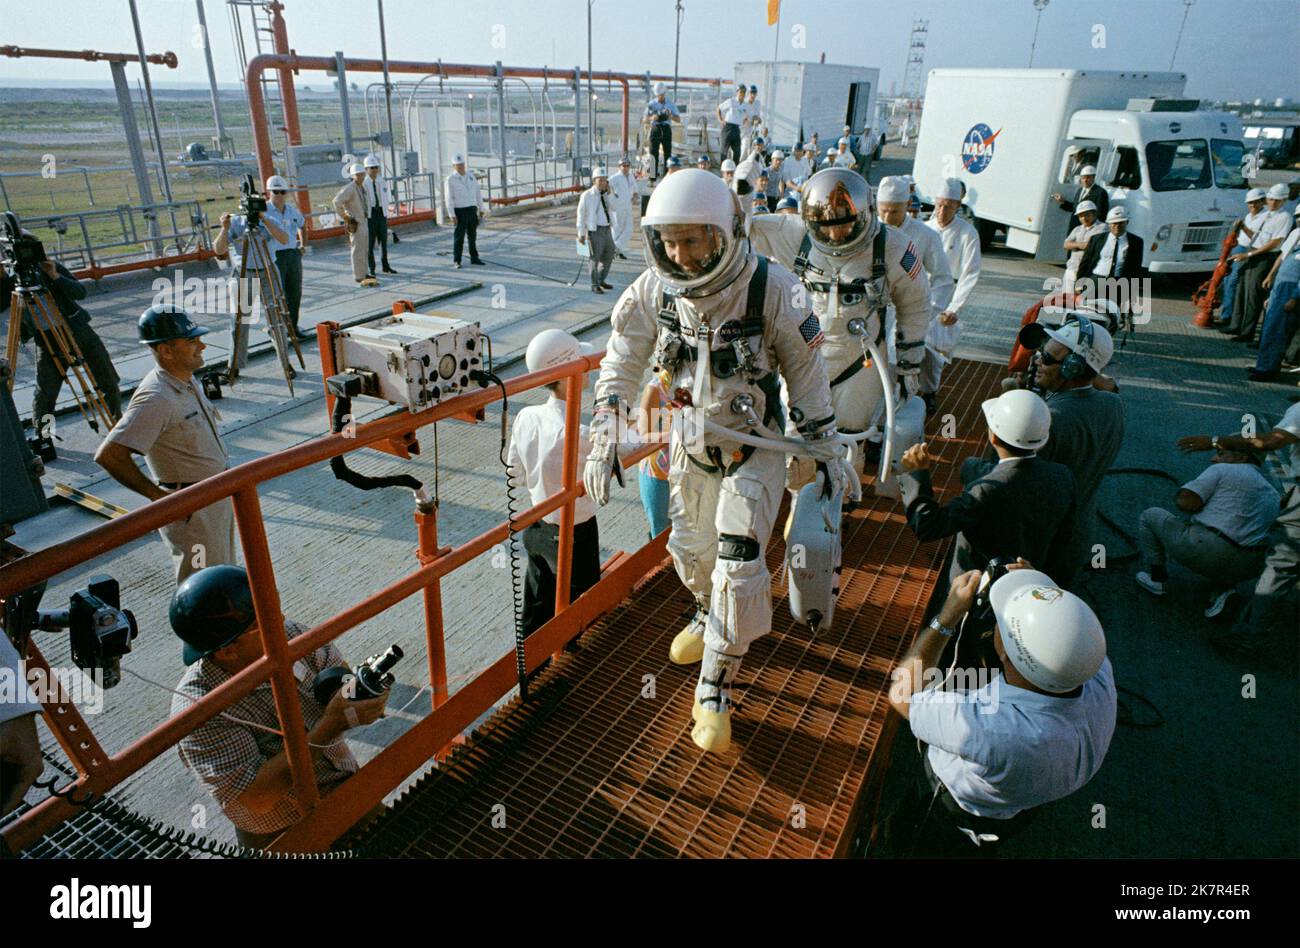 Cape Canaveral, United States. 18th Oct, 2022. NASA astronaut James A. McDivitt, commander of the Gemini Titan 4 space mission, followed by Edward H. White II, pilot, as they walk up the ramp at Pad 19 during prelaunch countdown at the Kennedy Space Center, June 3, 1965 in Cape Canaveral, Florida. McDivitt commanded the first spacewalk mission and took part in the first crewed orbital flight of a the lunar module, during Apollo 9 died October 15, 2022 at age 93. Credit: NASA/NASA/Alamy Live News Stock Photo